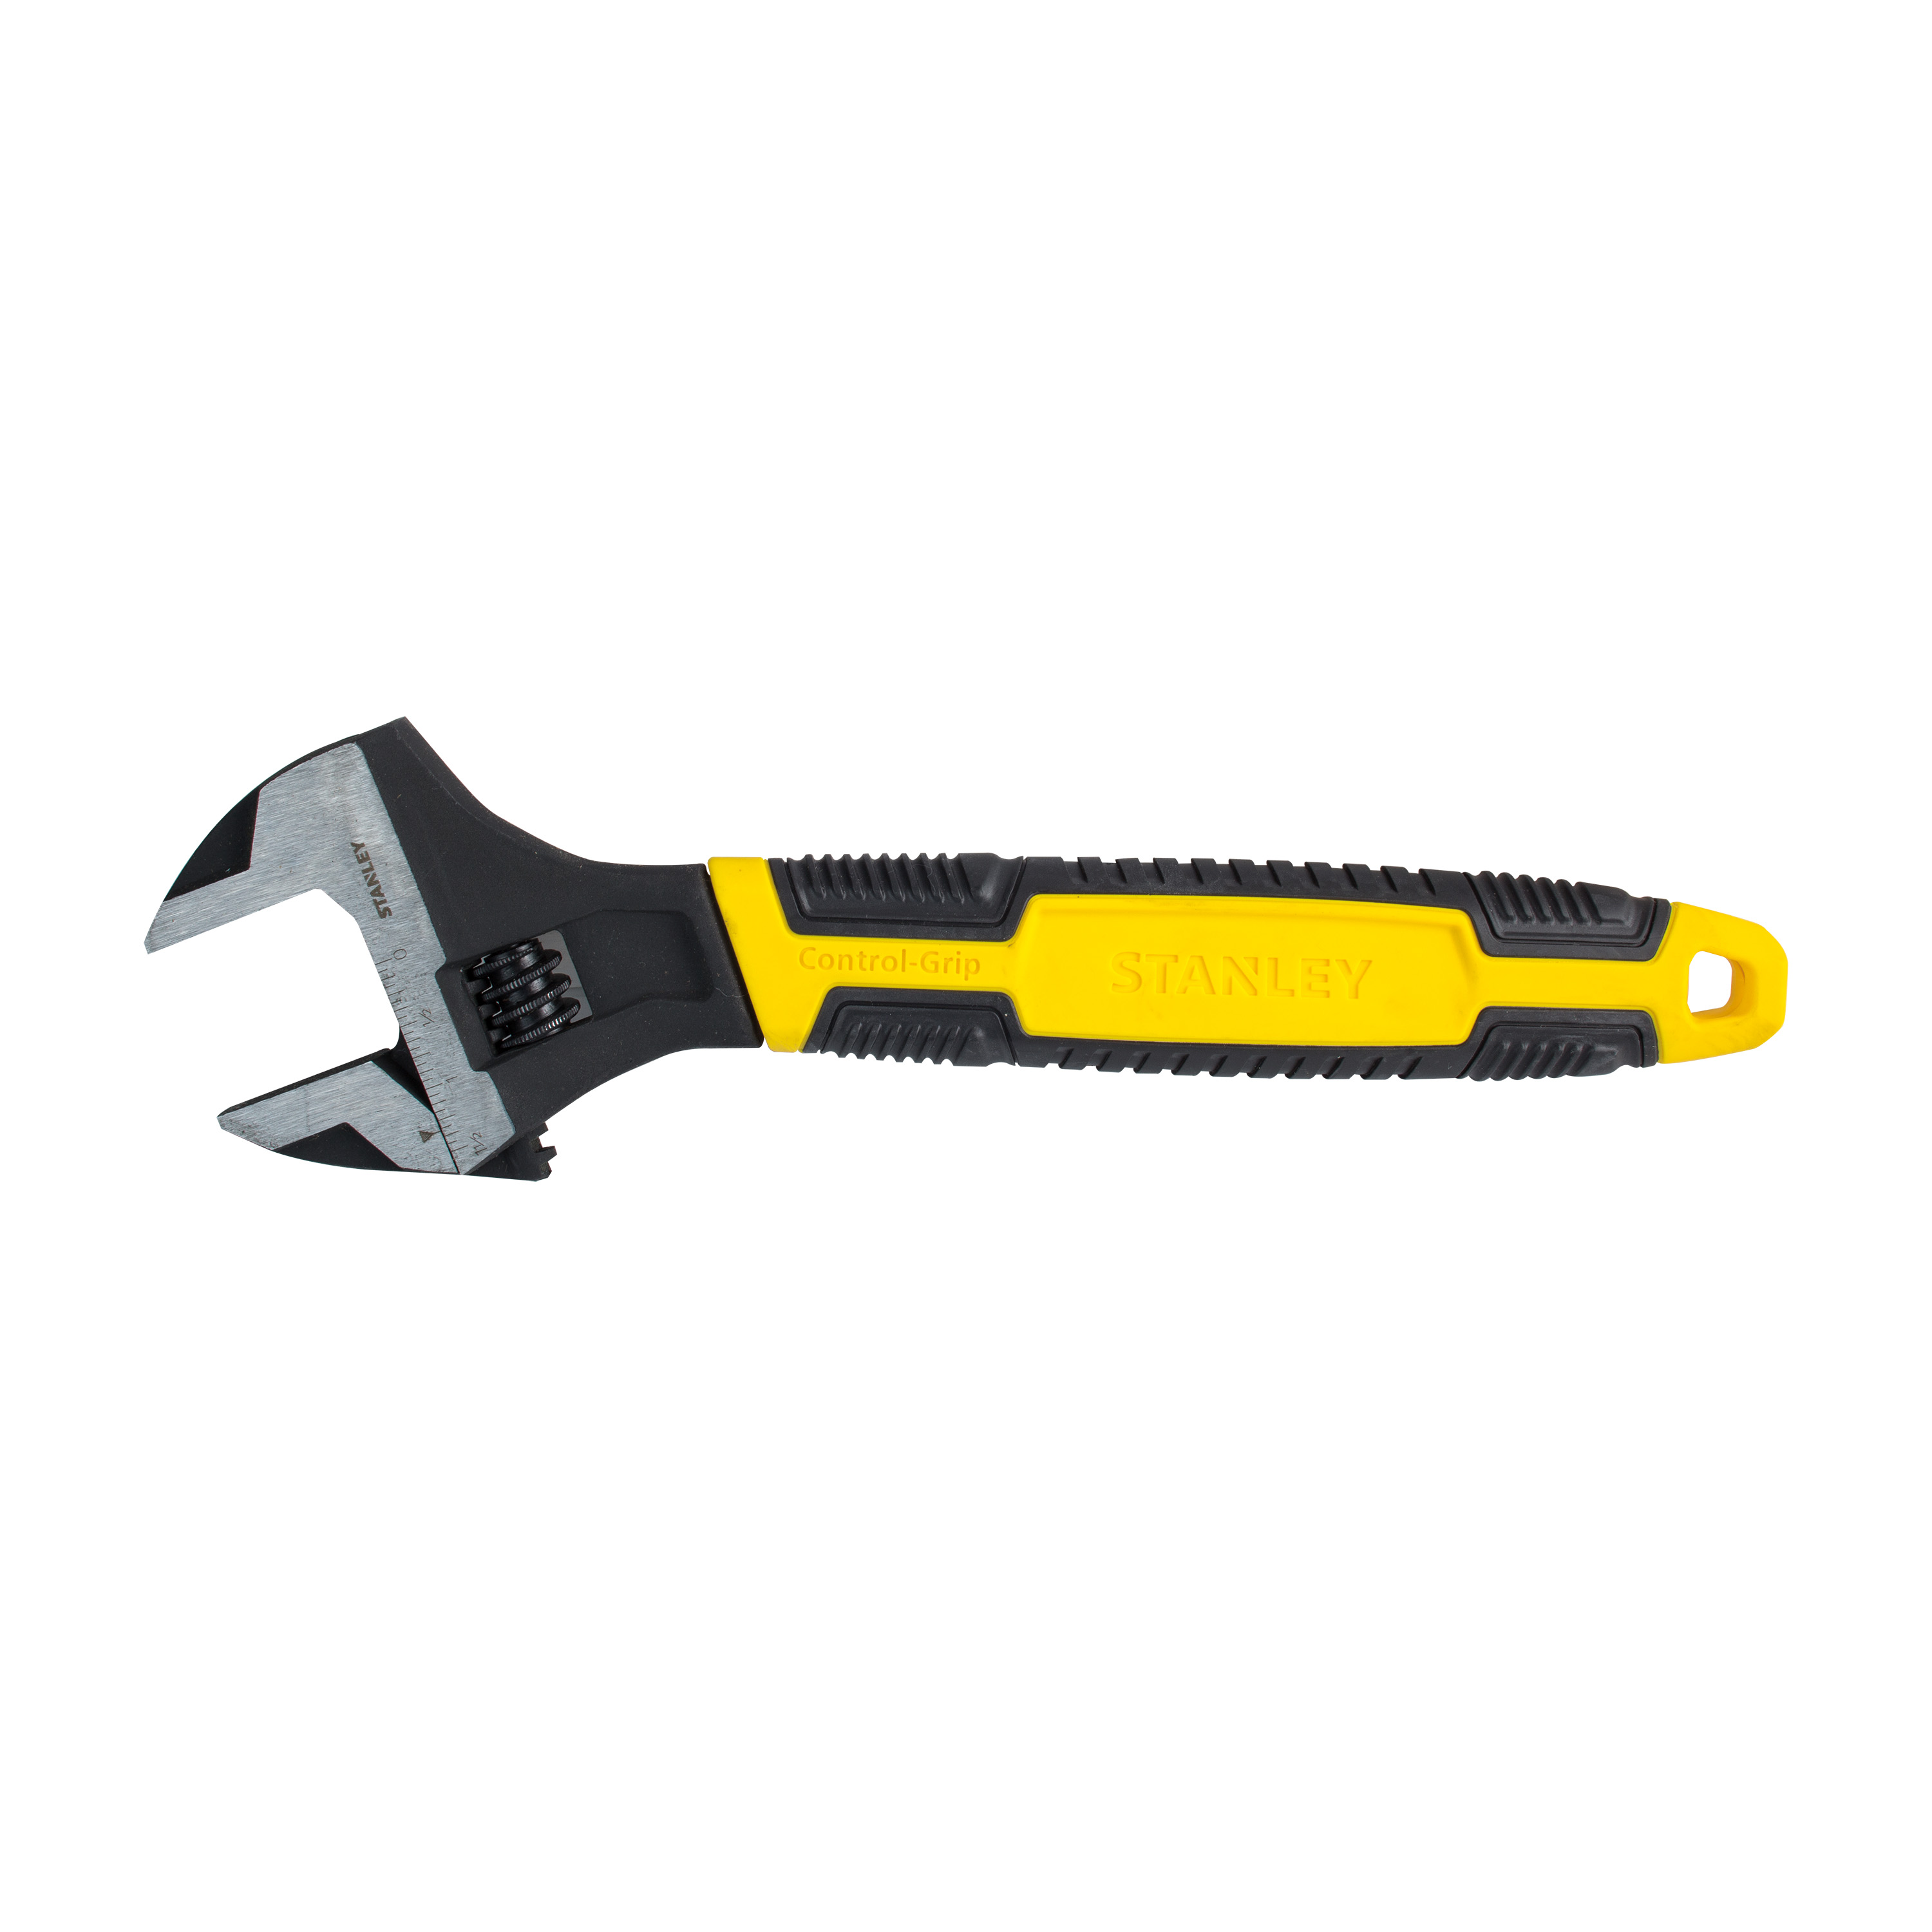 STANLEY 90-950 12" Adjustable Wrench - image 3 of 3